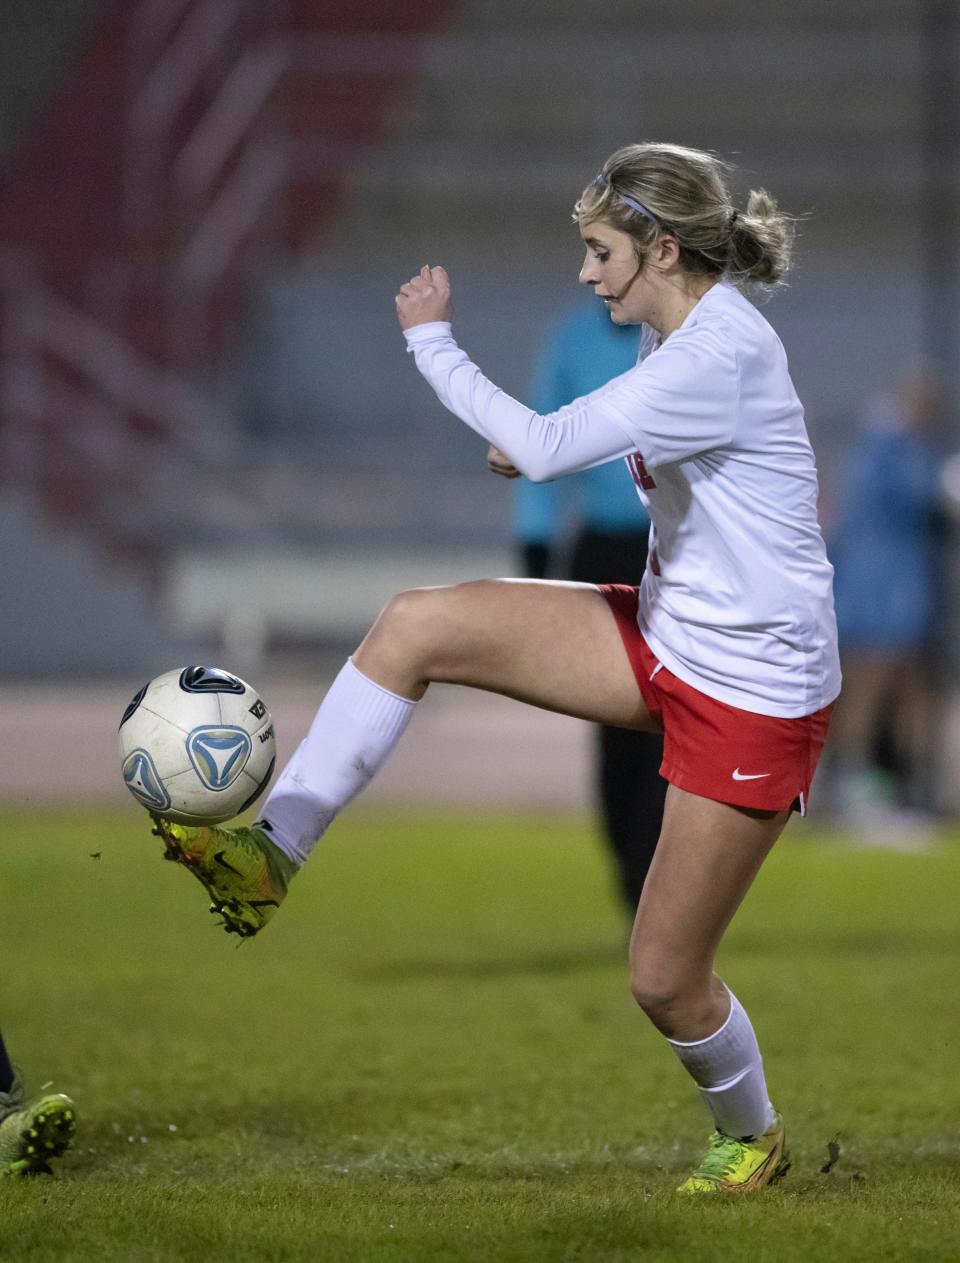 Berkleigh Jernigan (9) takes control of the ball during the Pace vs Navarre girls soccer game at Navarre High School on Tuesday, Jan. 11, 2022.